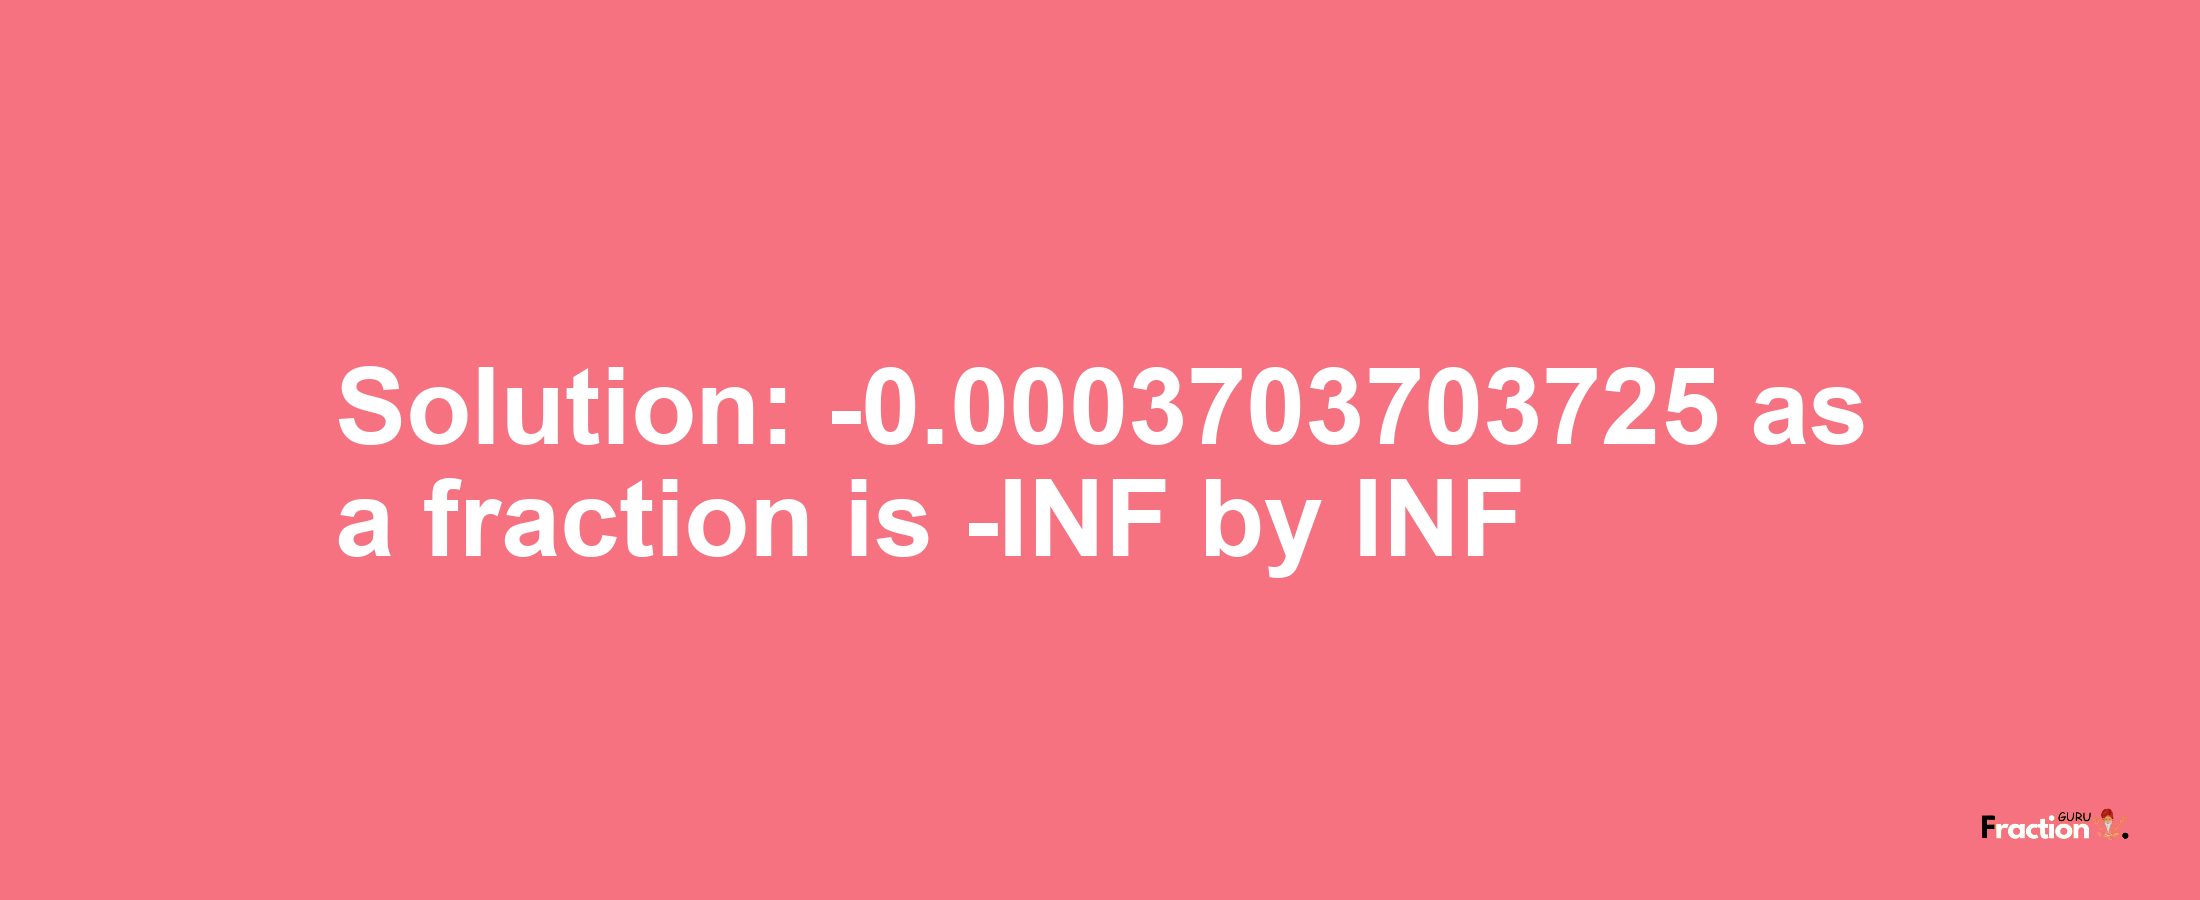 Solution:-0.0003703703725 as a fraction is -INF/INF